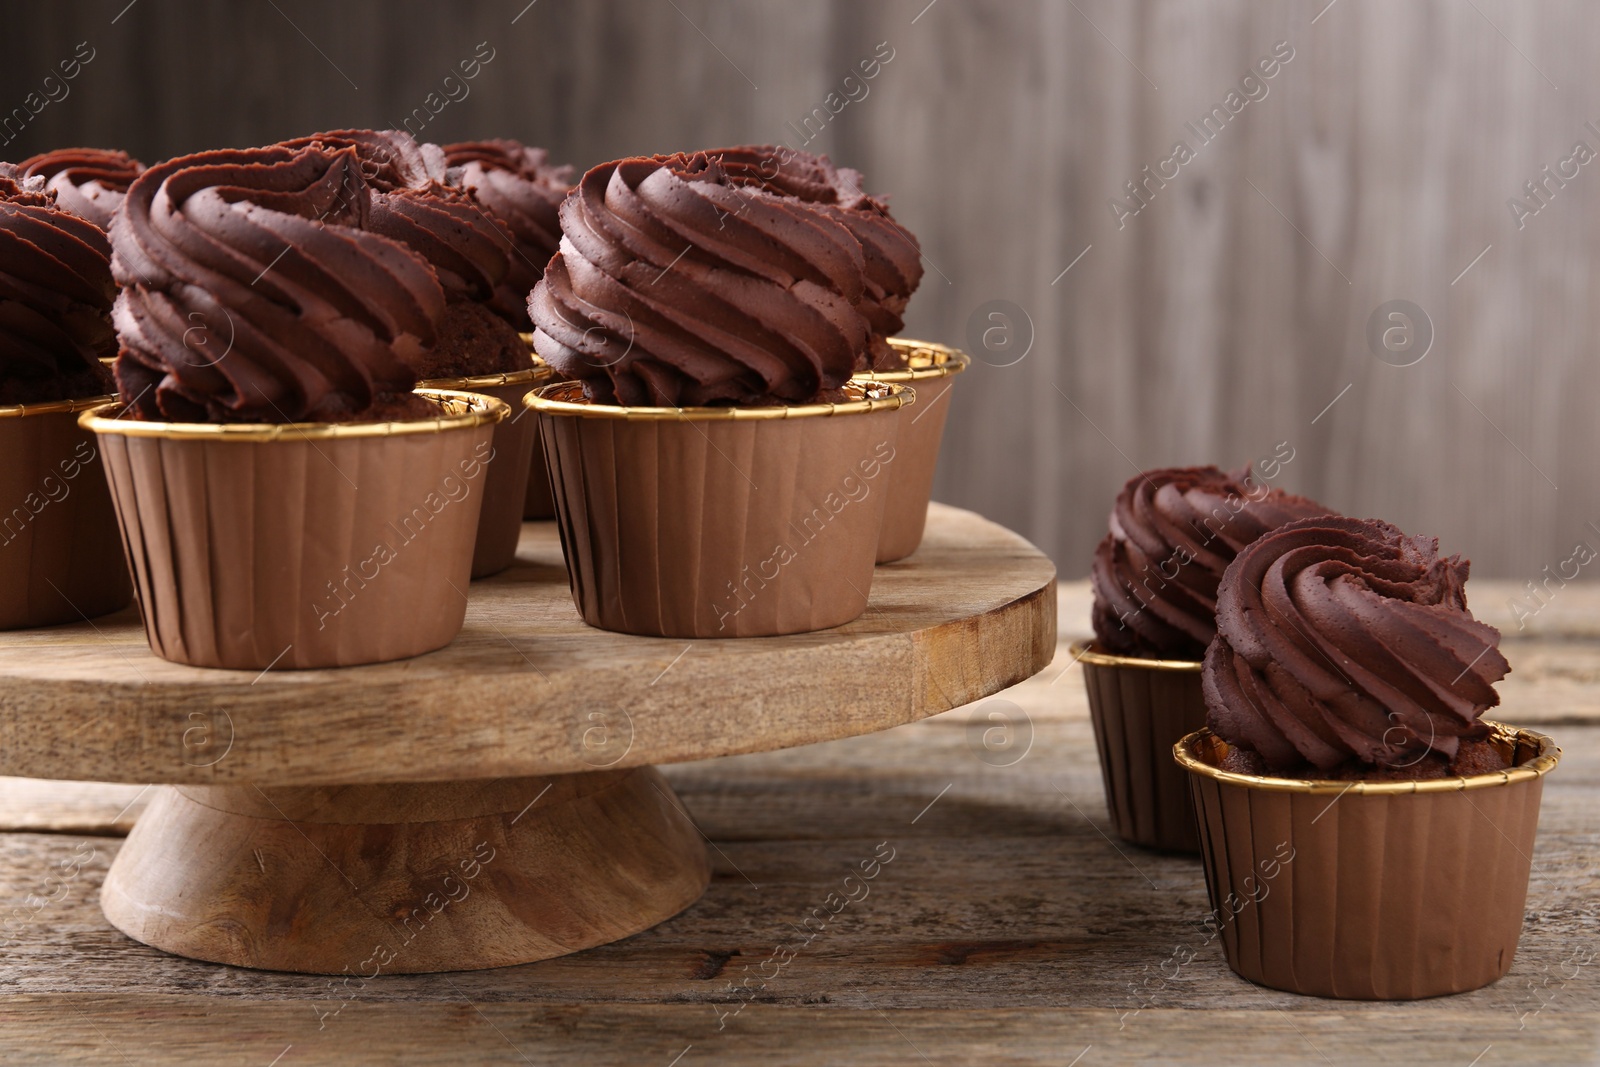 Photo of Delicious chocolate cupcakes on wooden table. Sweet desserts